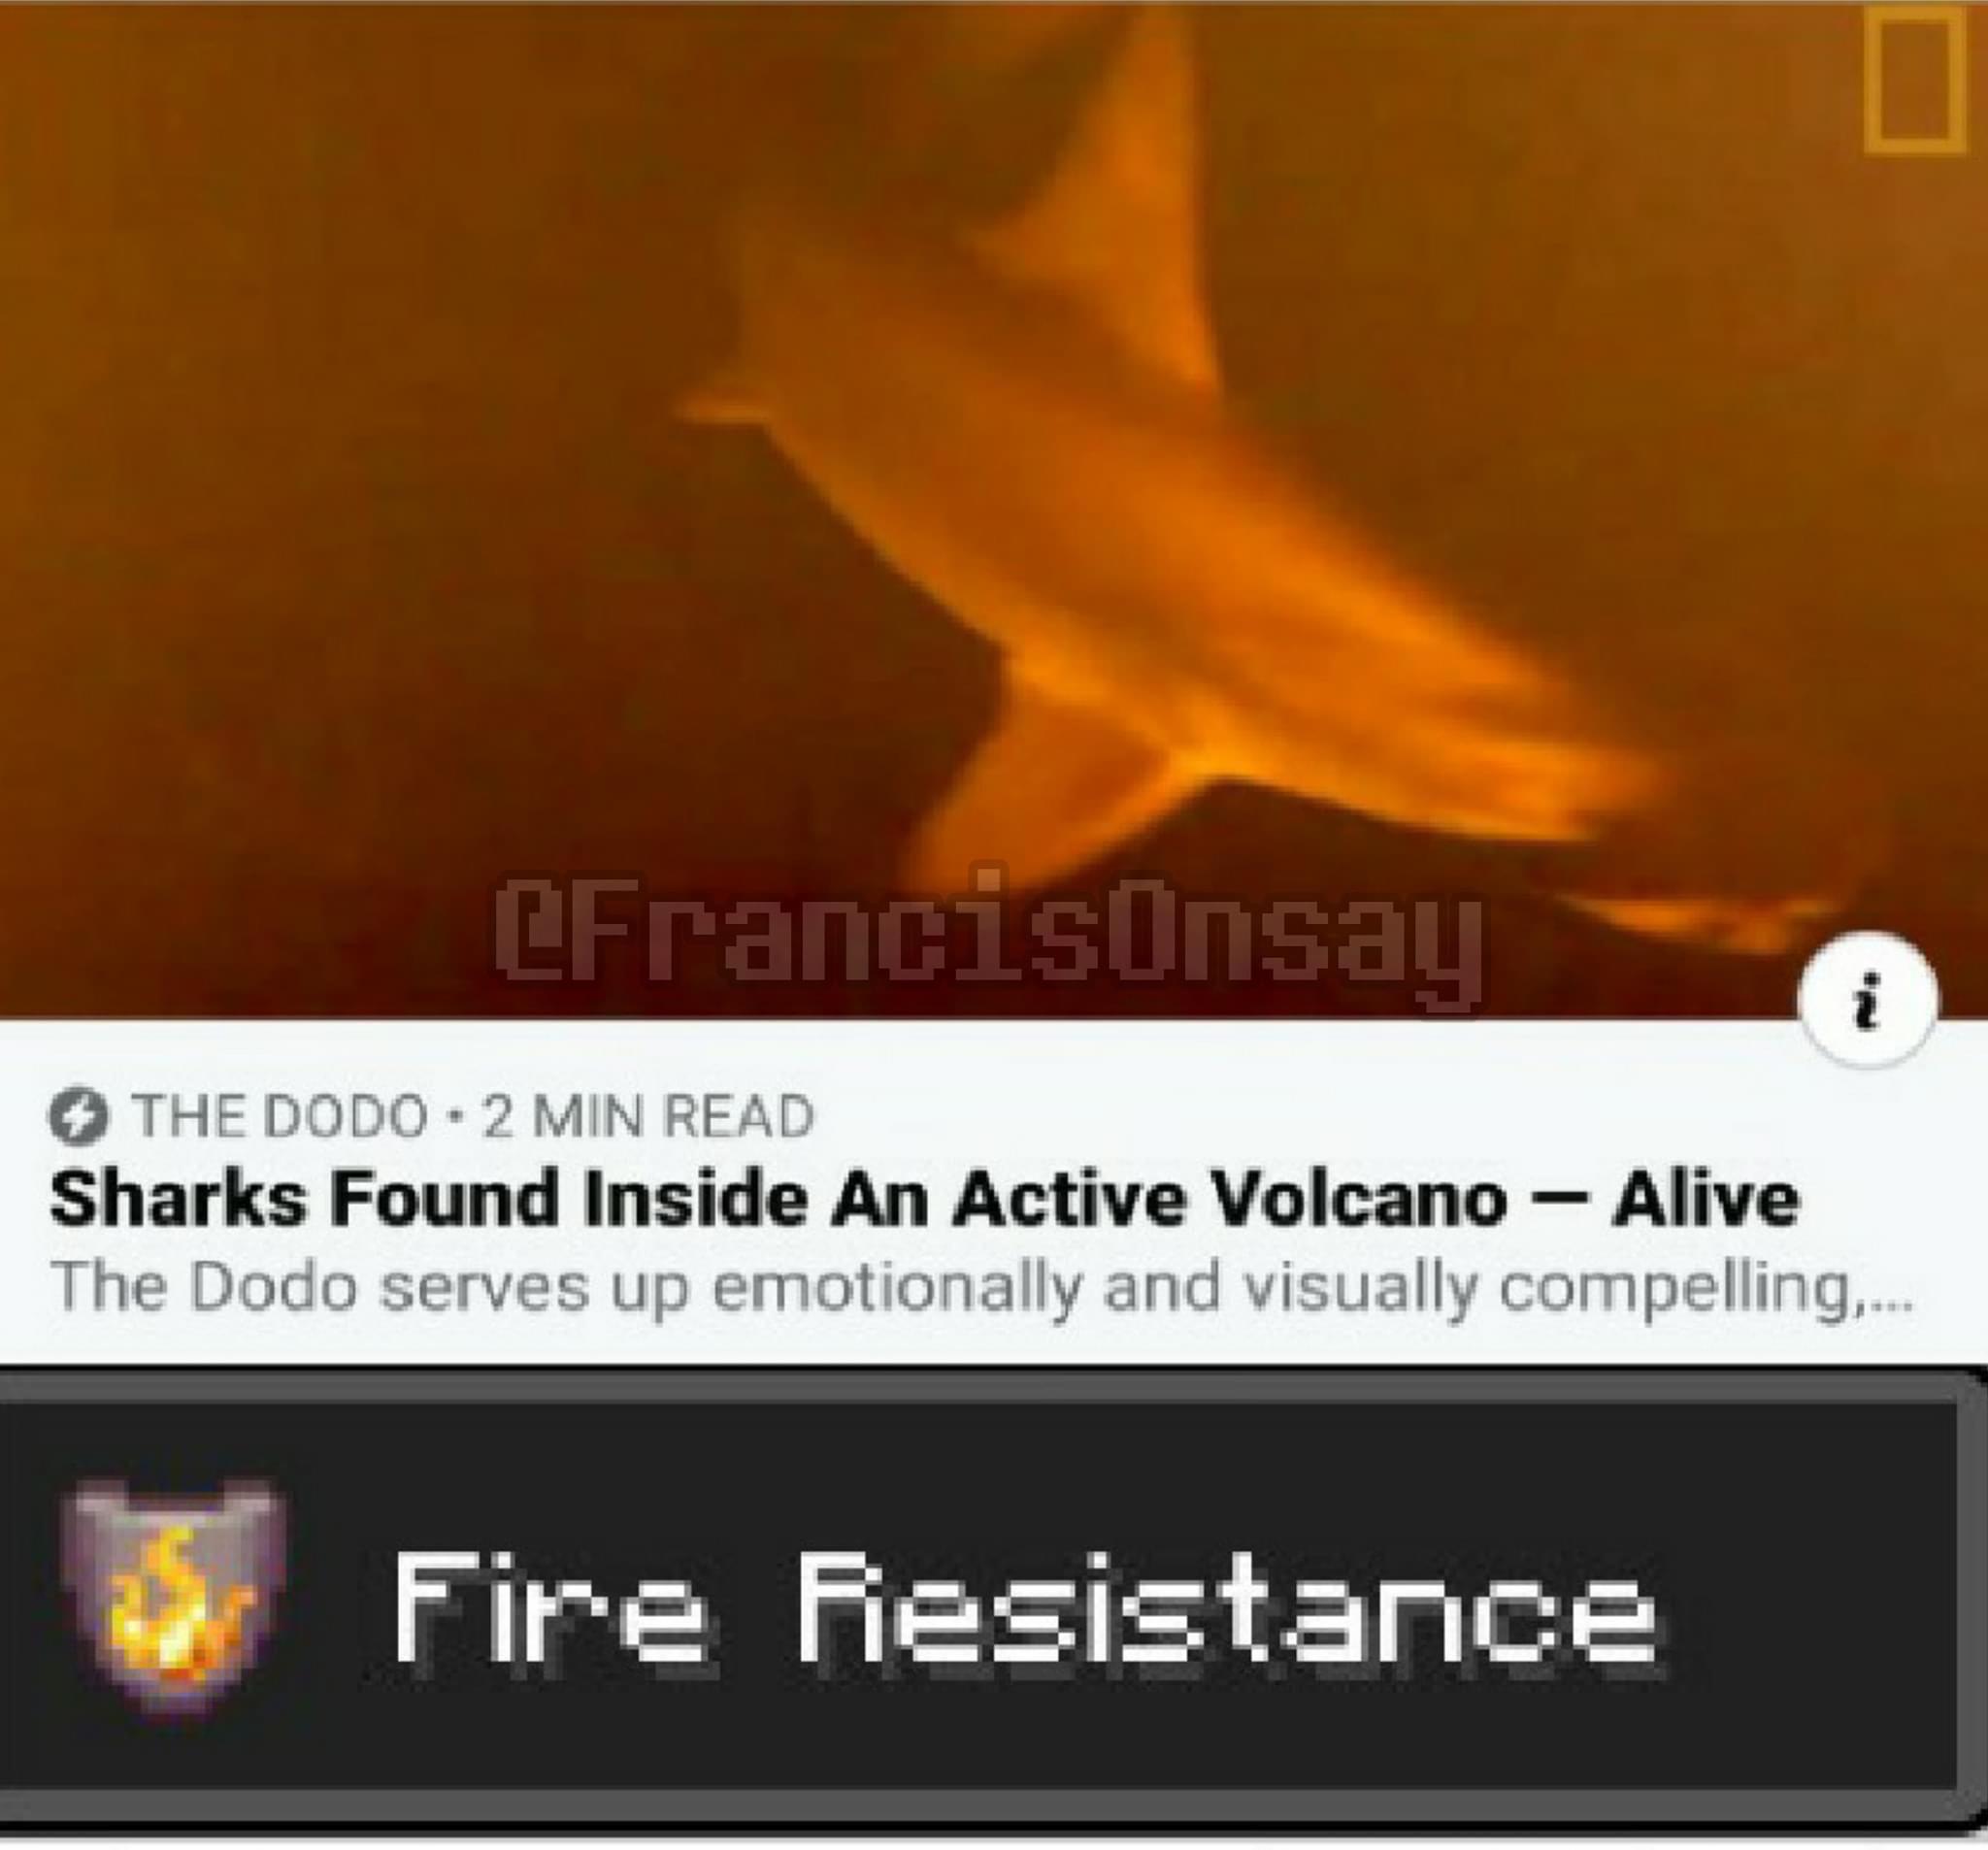 Minecraft, July minecraft memes Minecraft, July text: 0 THE DODO •2 MIN READ Sharks Found Inside An Active Volcano —J Alive The Dodo serves up emotionally and visually compelling.. Fire fiesistance 